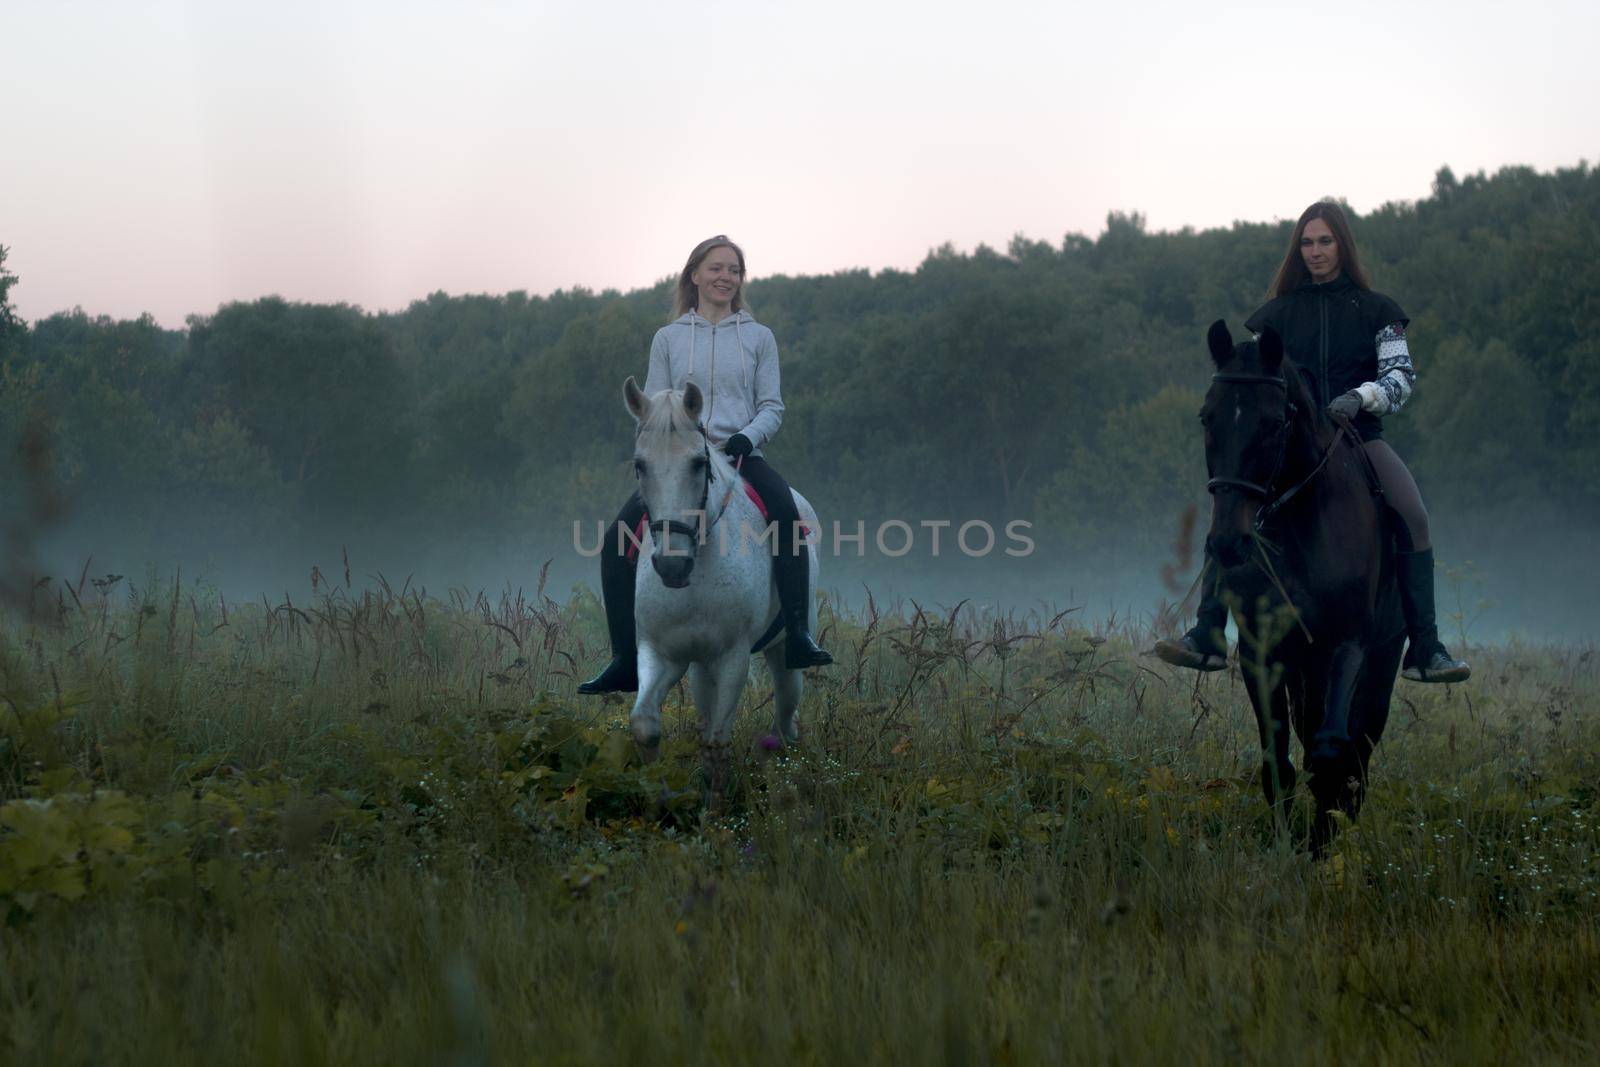 Two women on a foggy field riding horses towards the camera. Wide shot